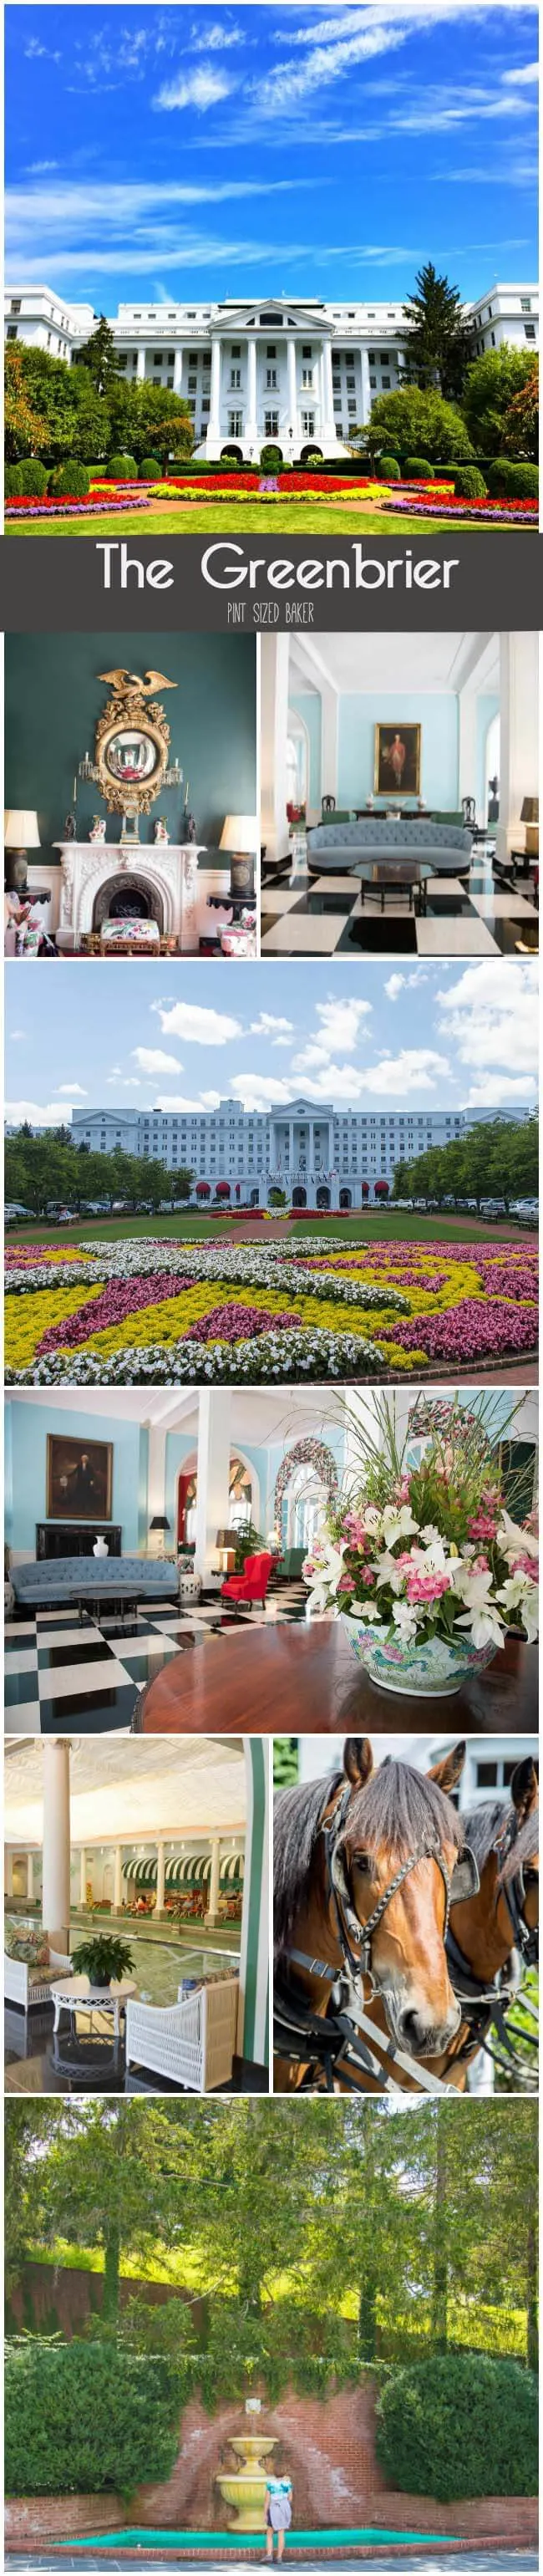 The Greenbrier Resort has been a premier destination for nearly 250 years! Home to the Greenbrier Classic Golf Tournament. If you're looking to relax in the lap of luxury, you've found the place!